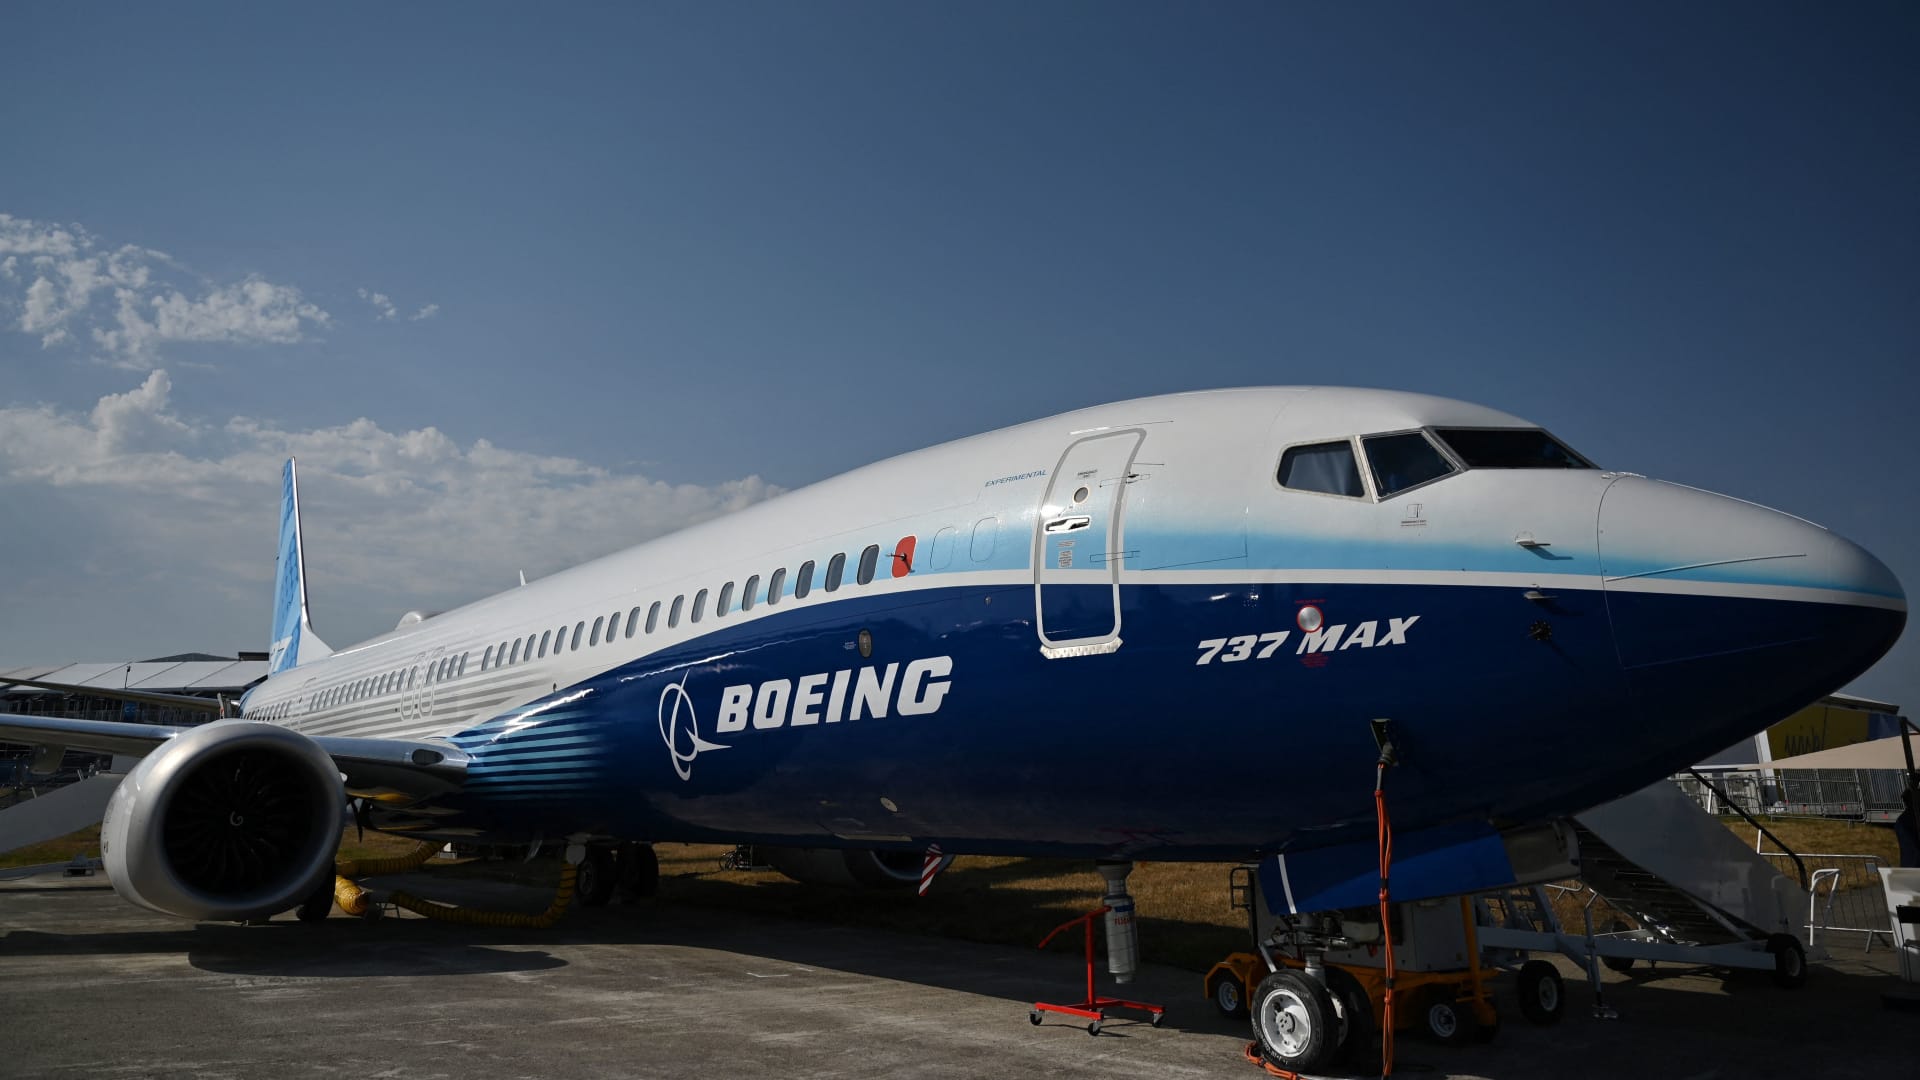 Boeing aircraft deliveries and orders rise in June